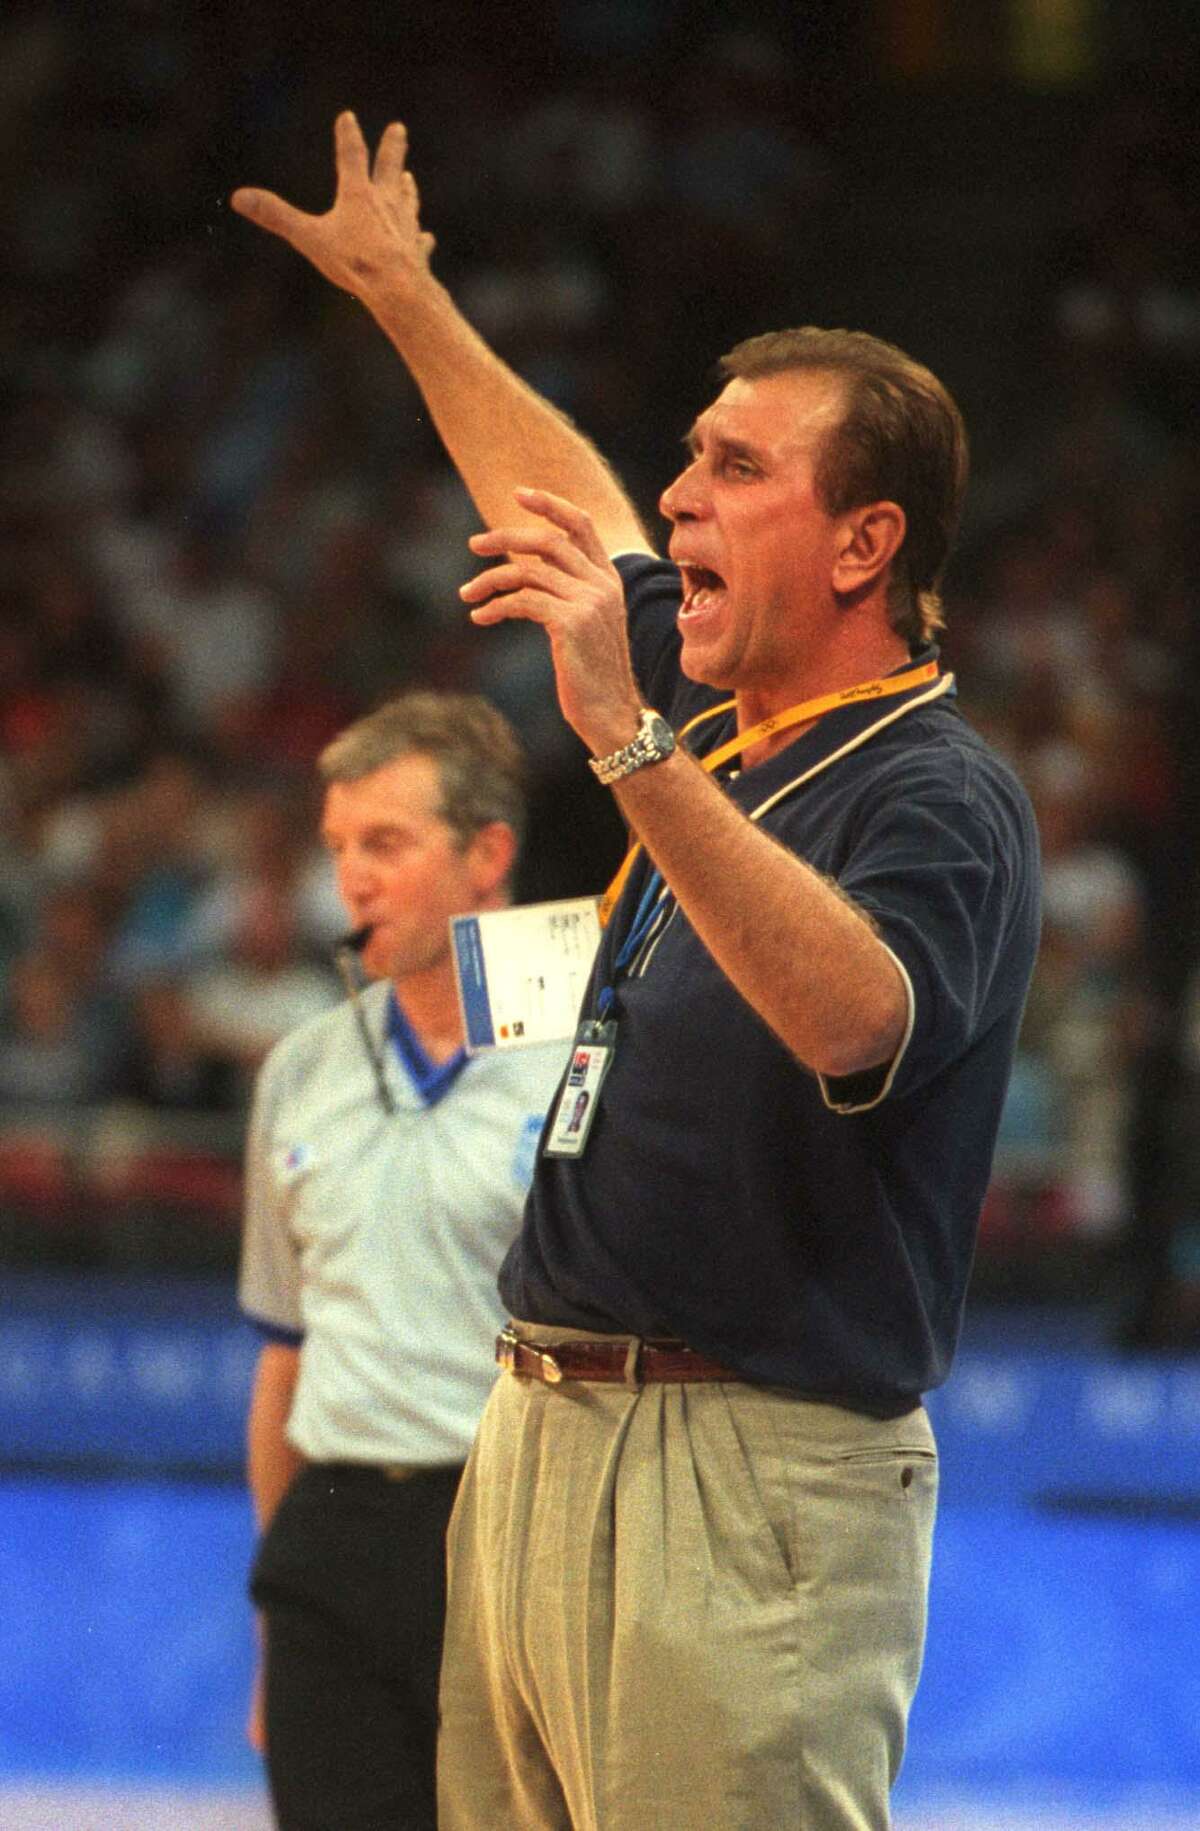 How Rudy Tomjanovich almost didn't become the Rockets' coach